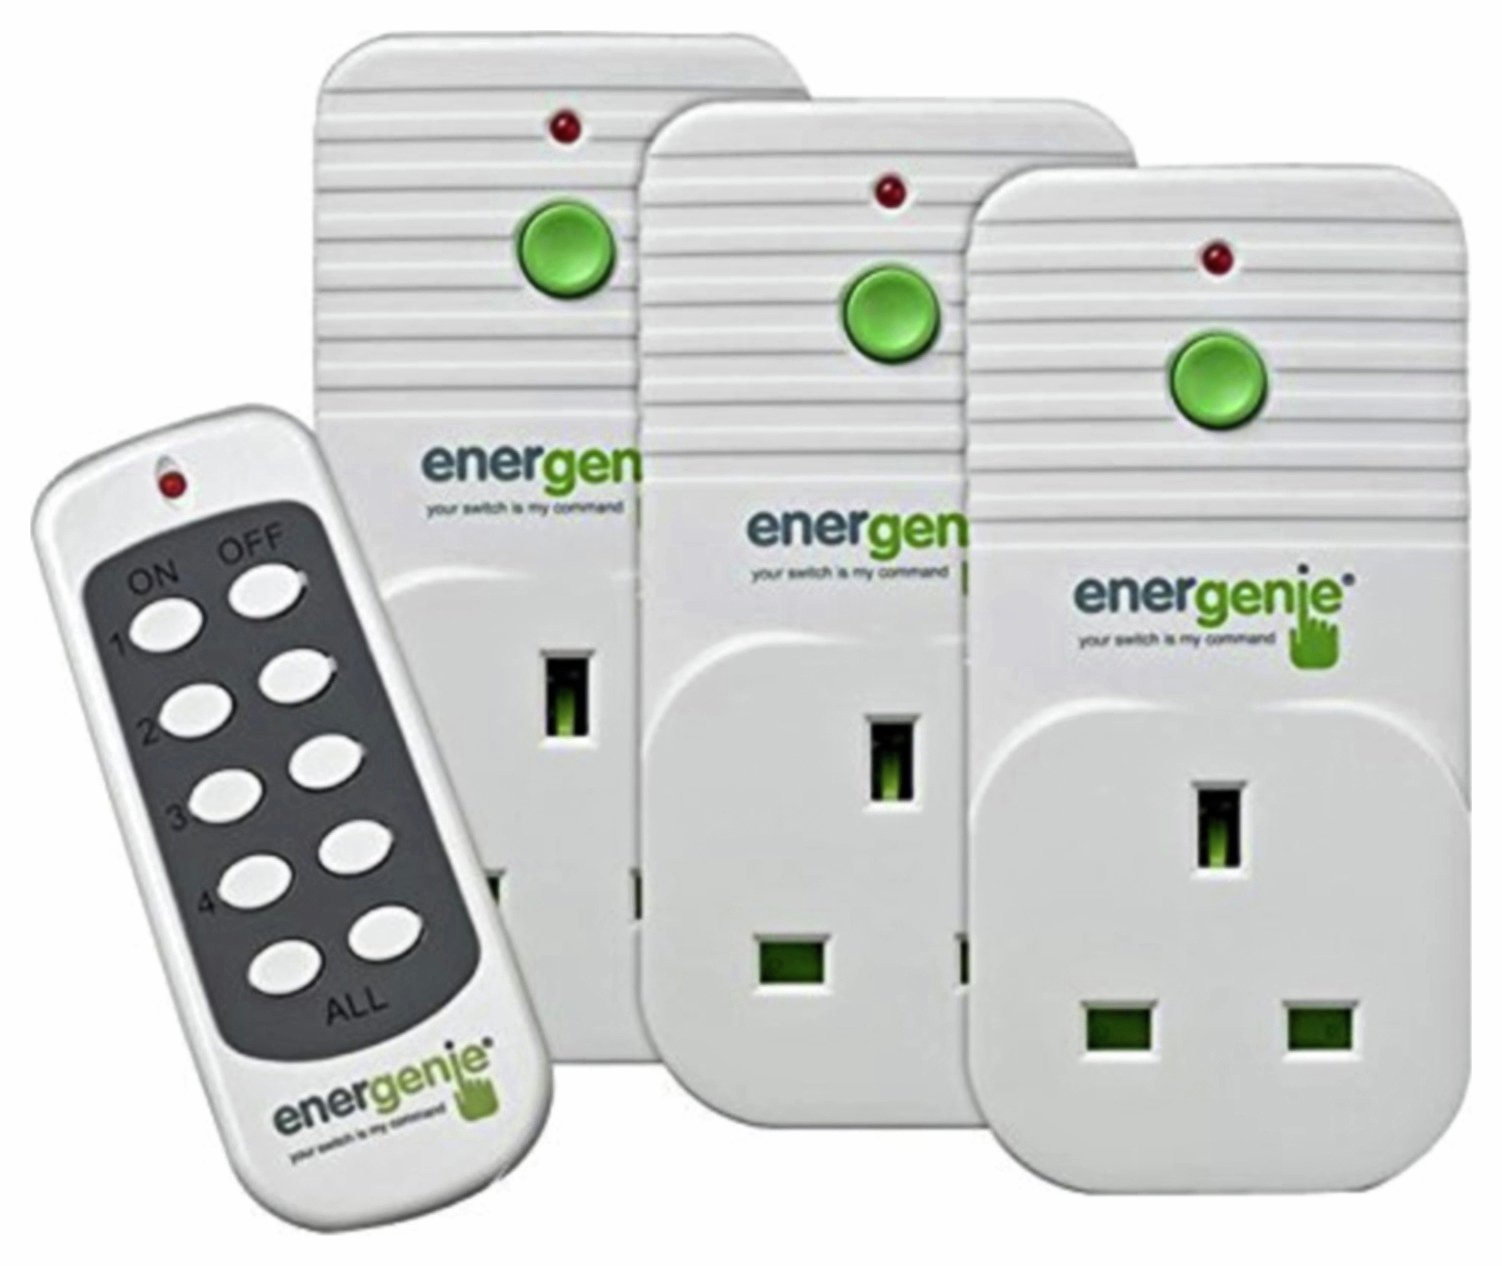 Energenie 3 Pack of Remote Controlled Plugs review